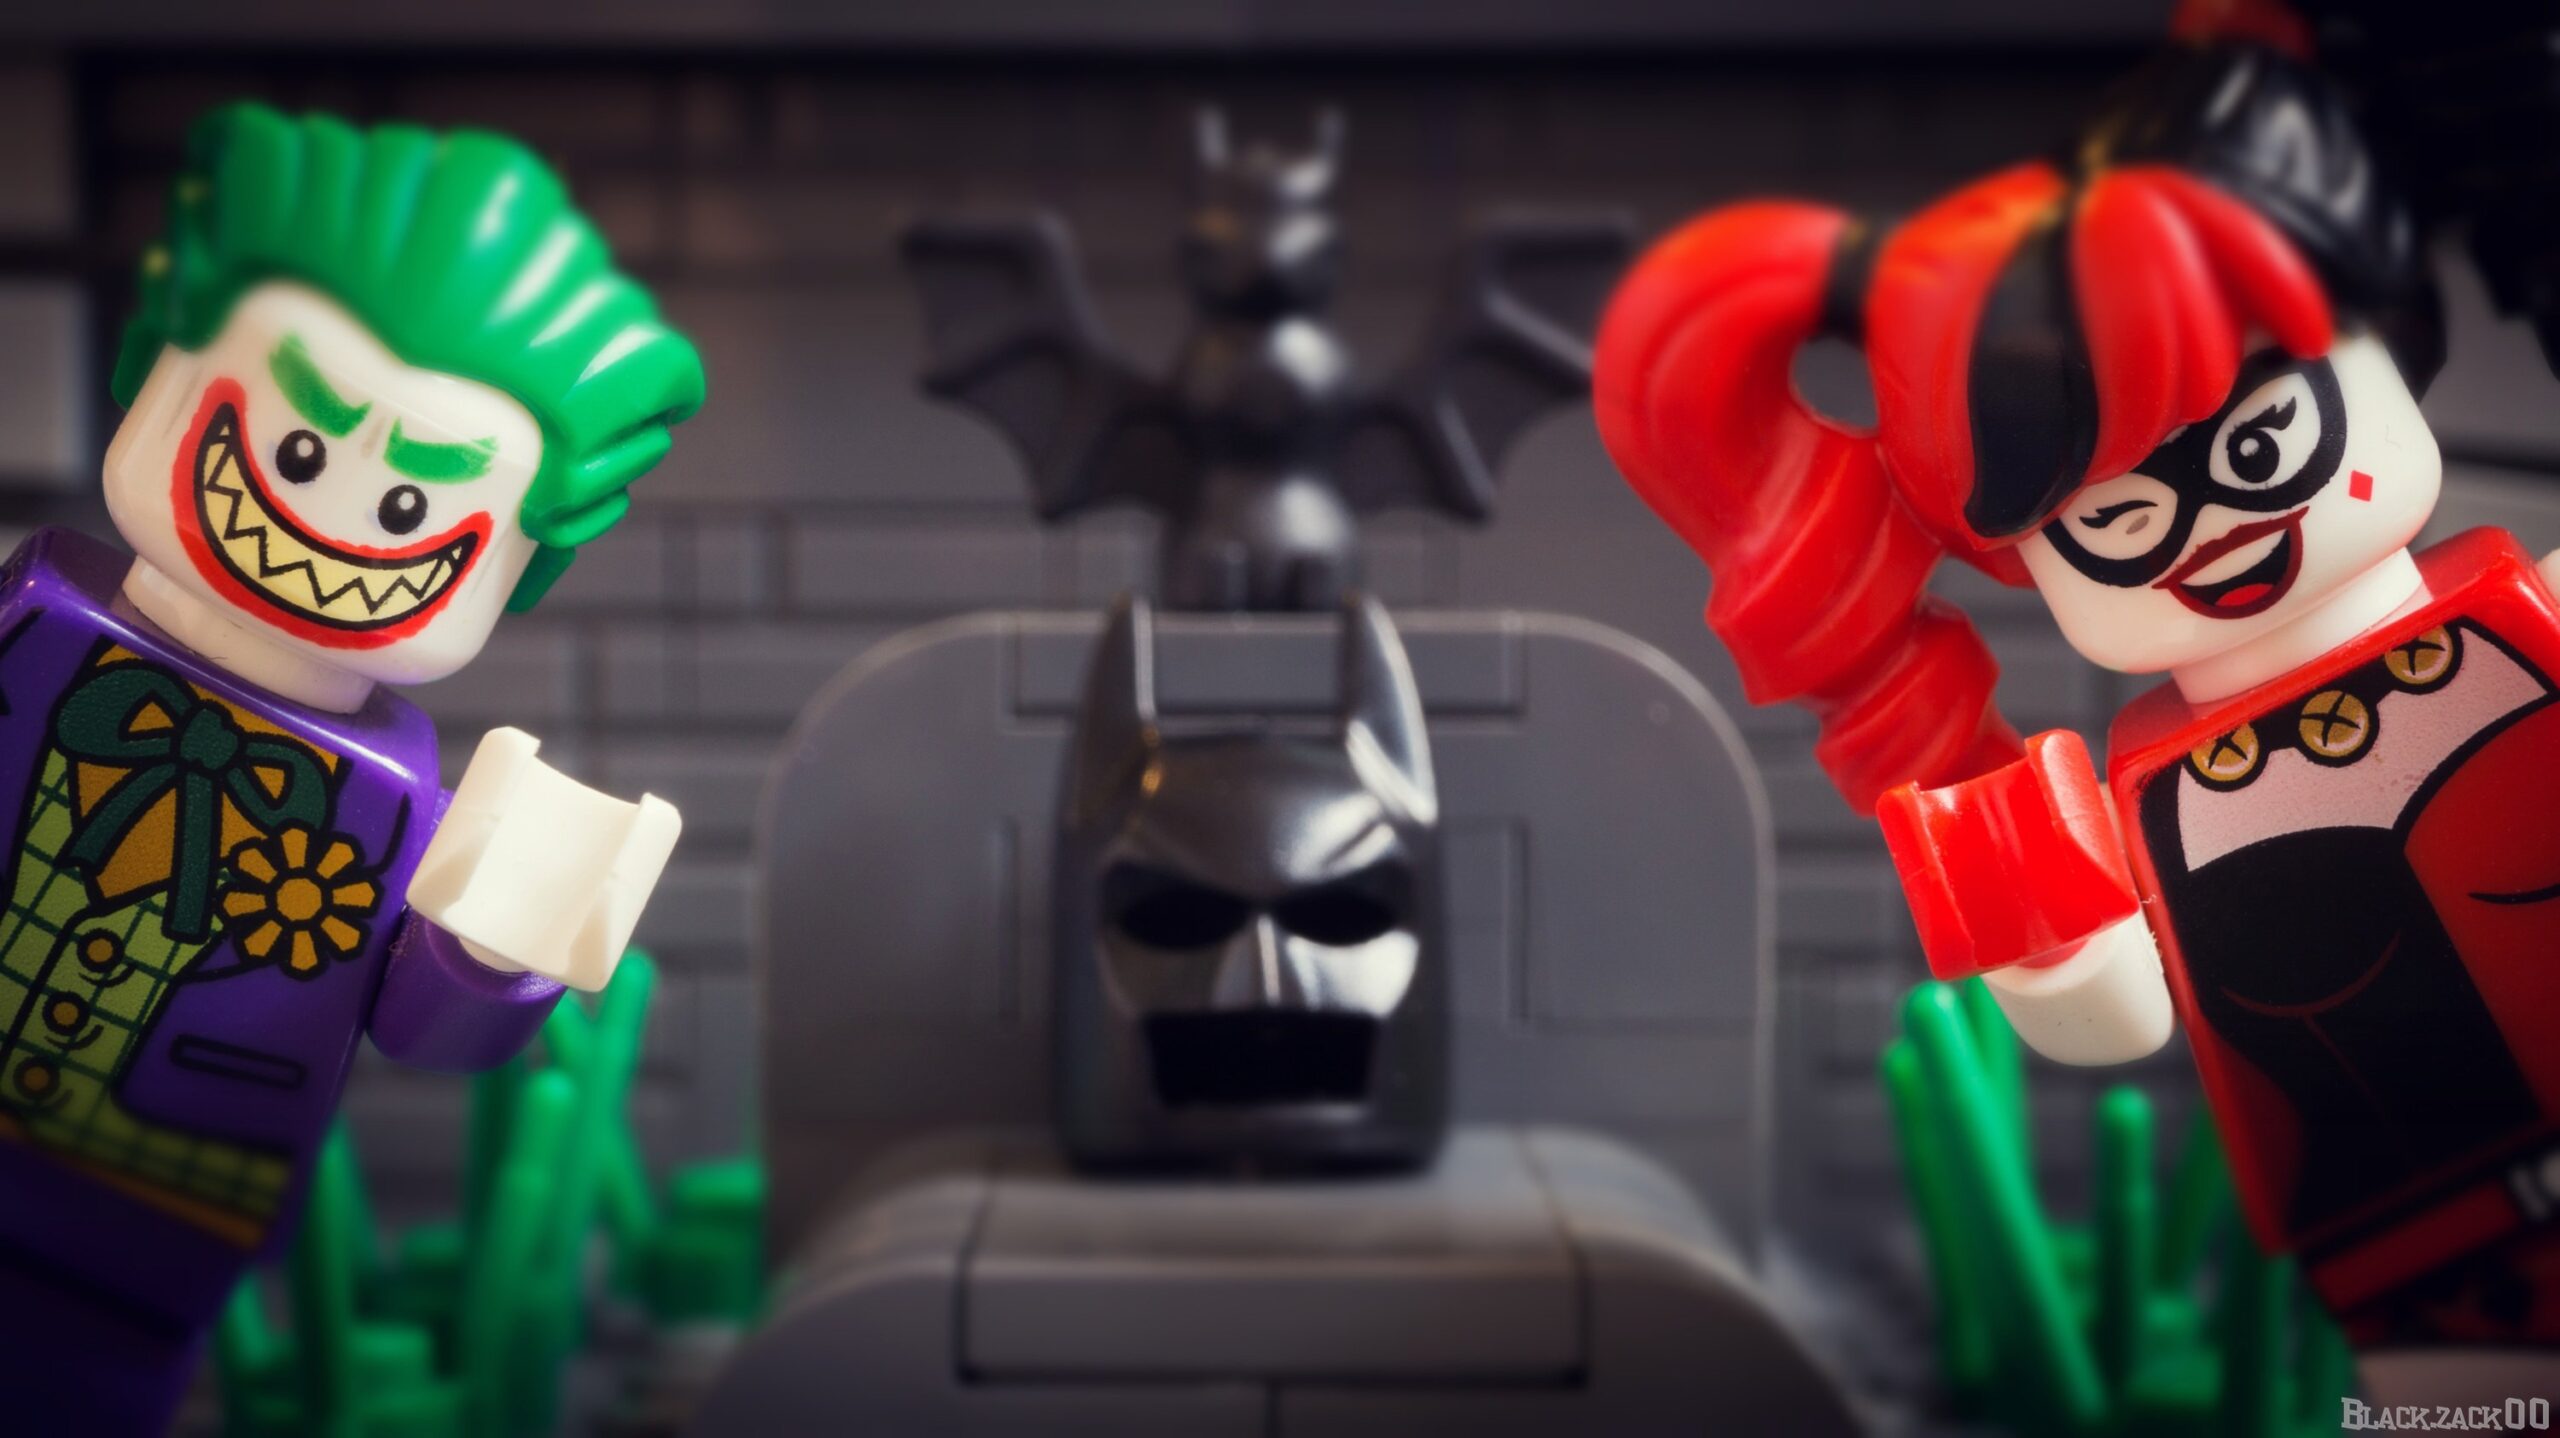 Should these two super villains train differently?